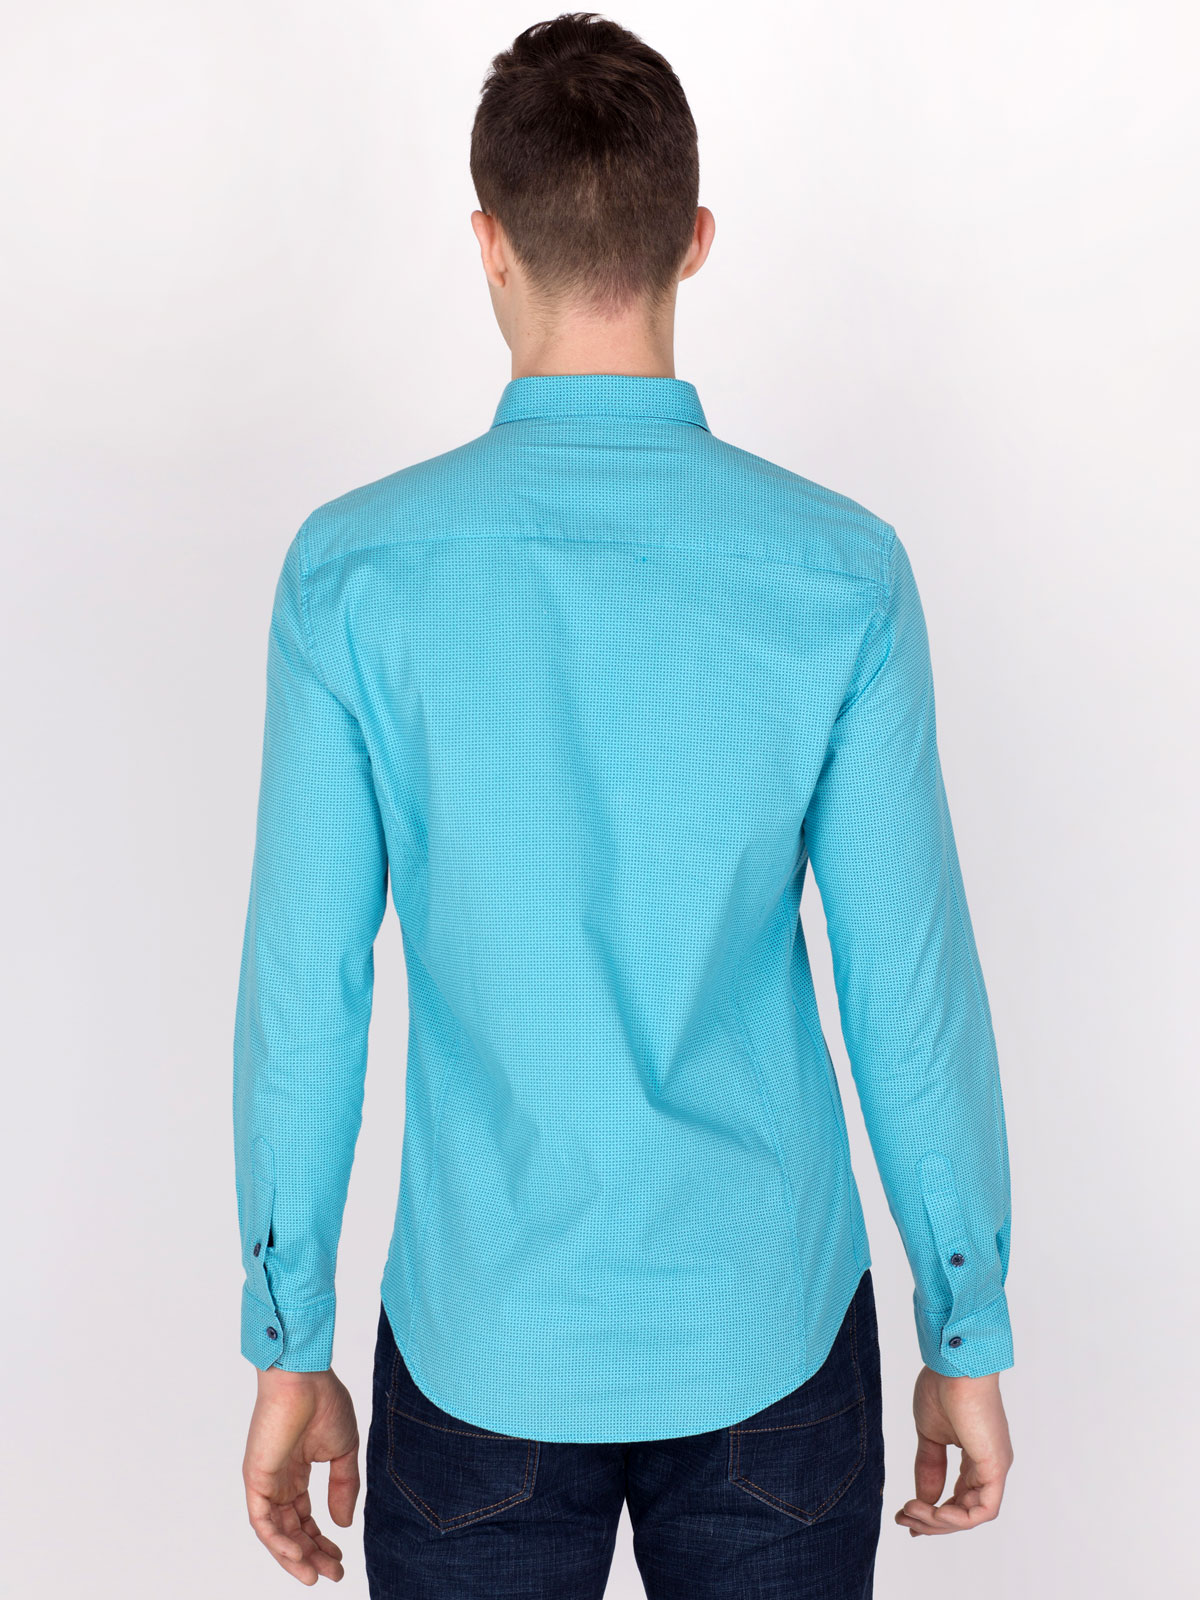 Turquoise shirt with small figures - 21457 € 30.93 img3